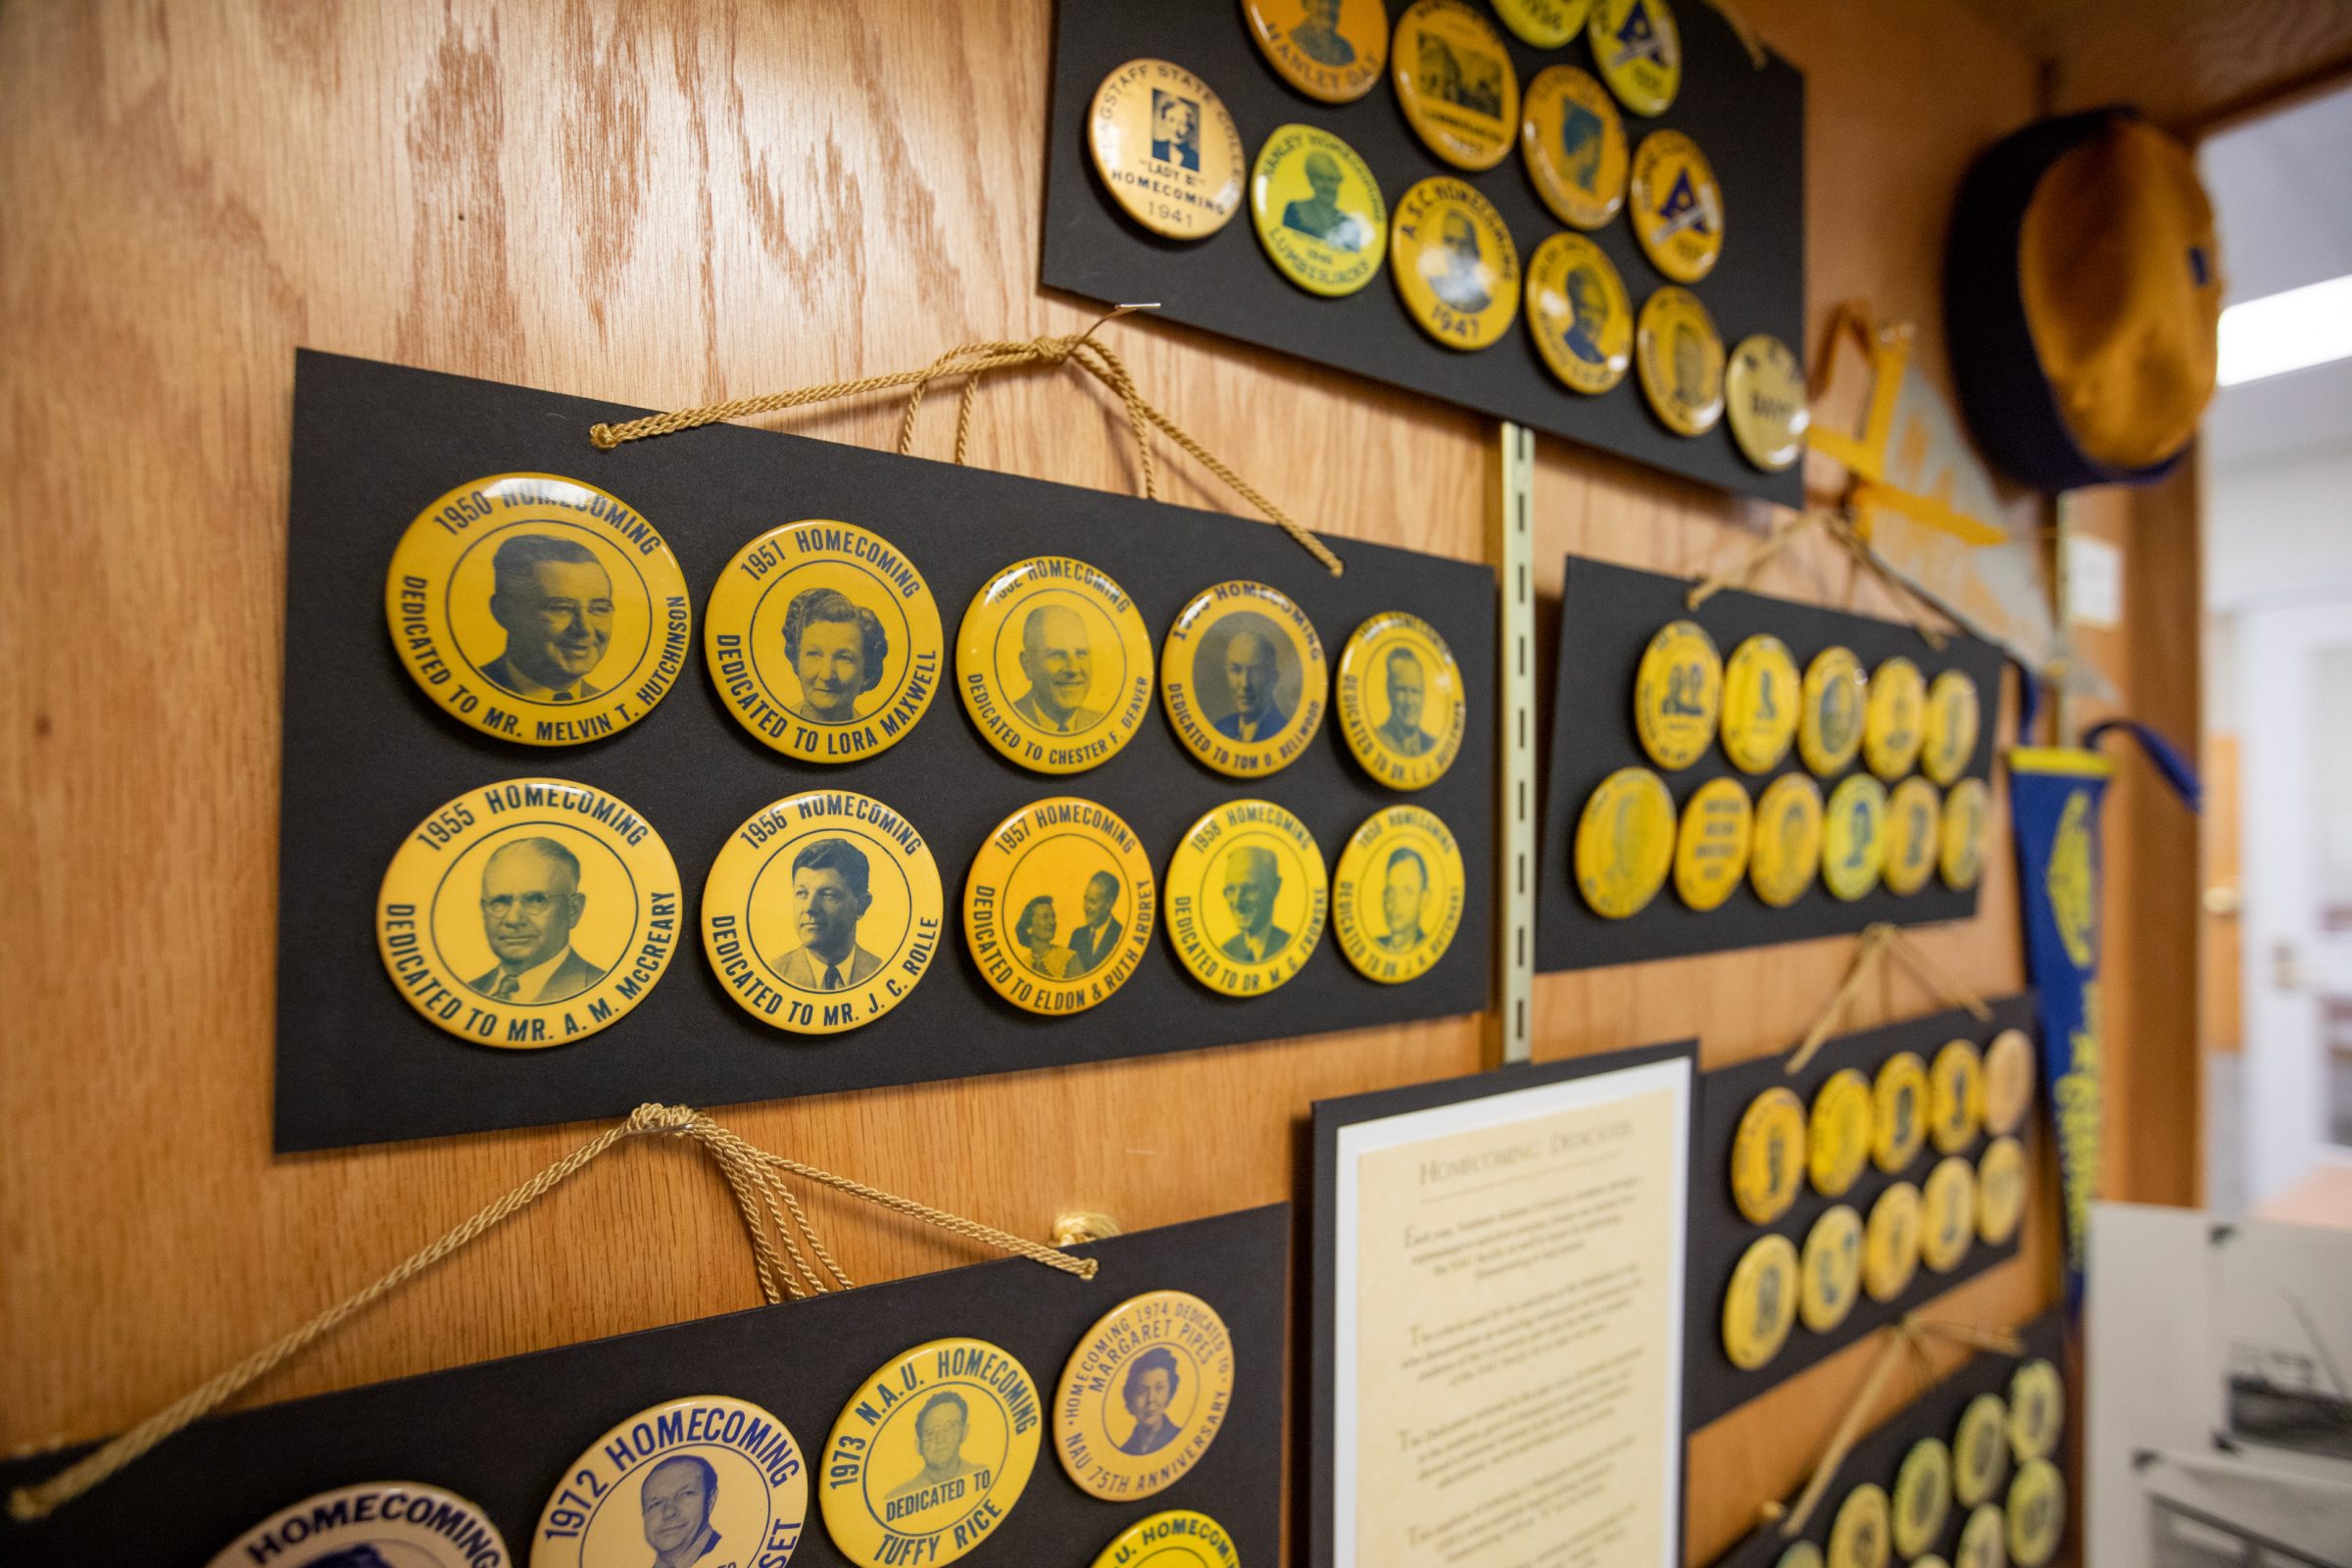 A wall of past dedicatees buttons.